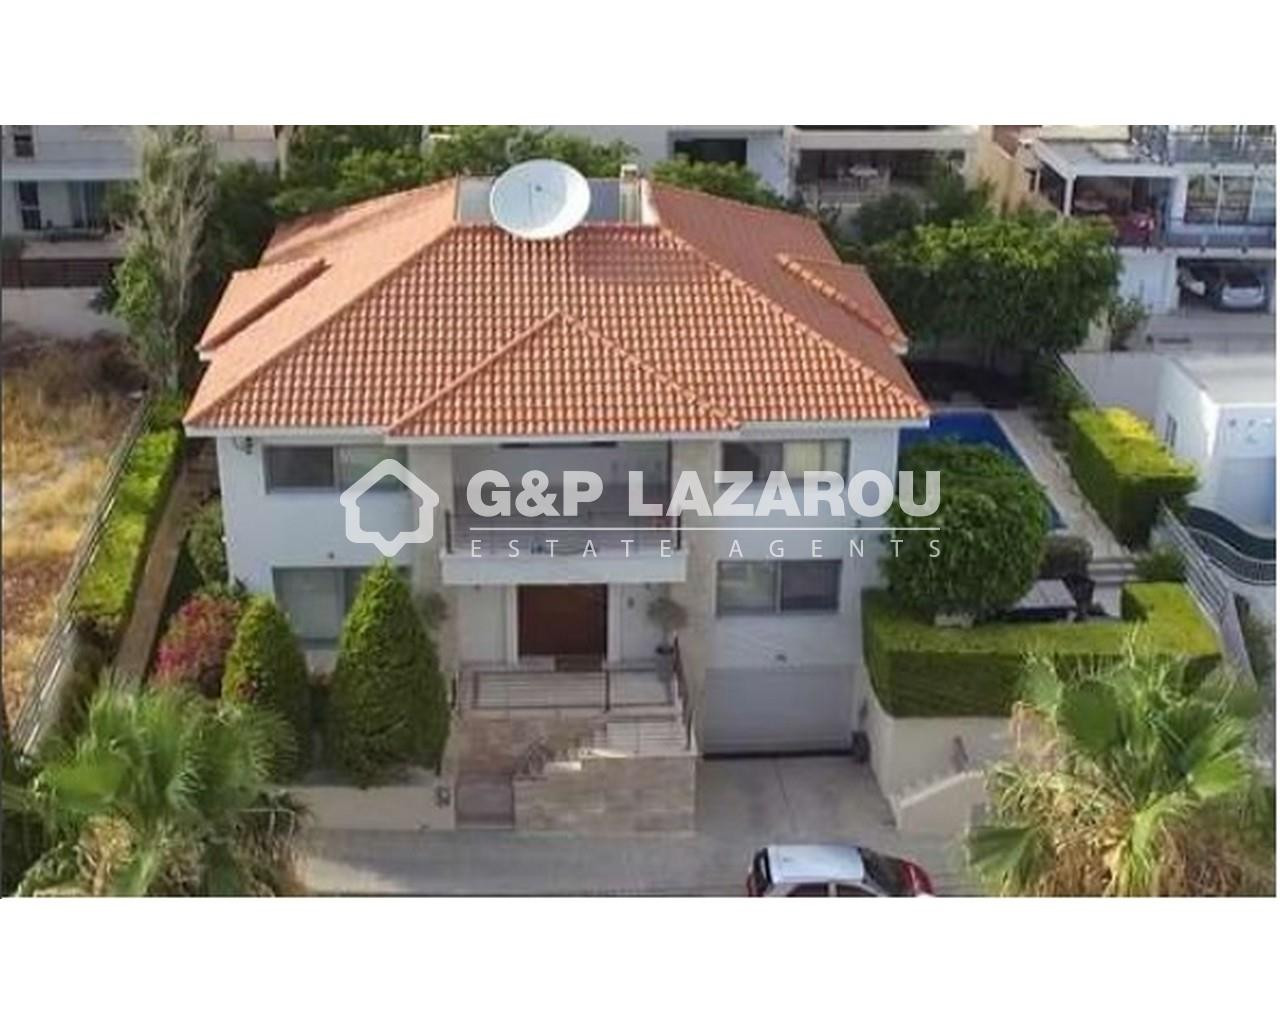 5 Bedroom House for Sale in Limassol – Mesa Geitonia